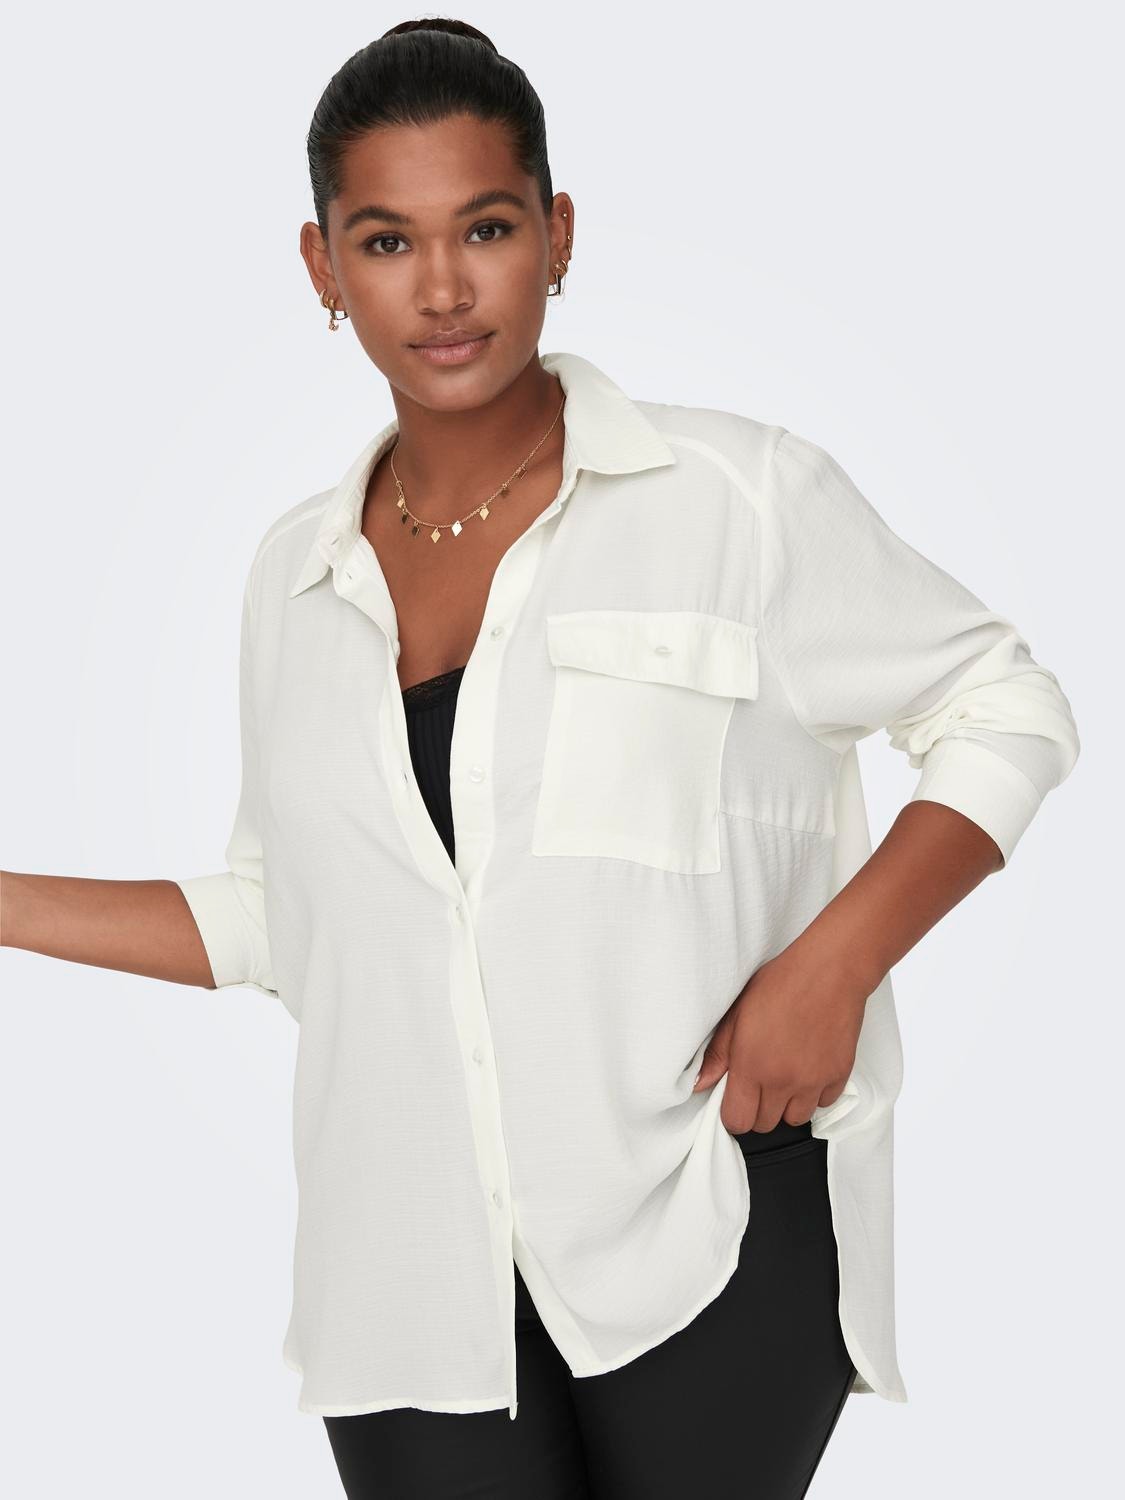 ONLY Curvy solid colored Shirt -Cloud Dancer - 15269687